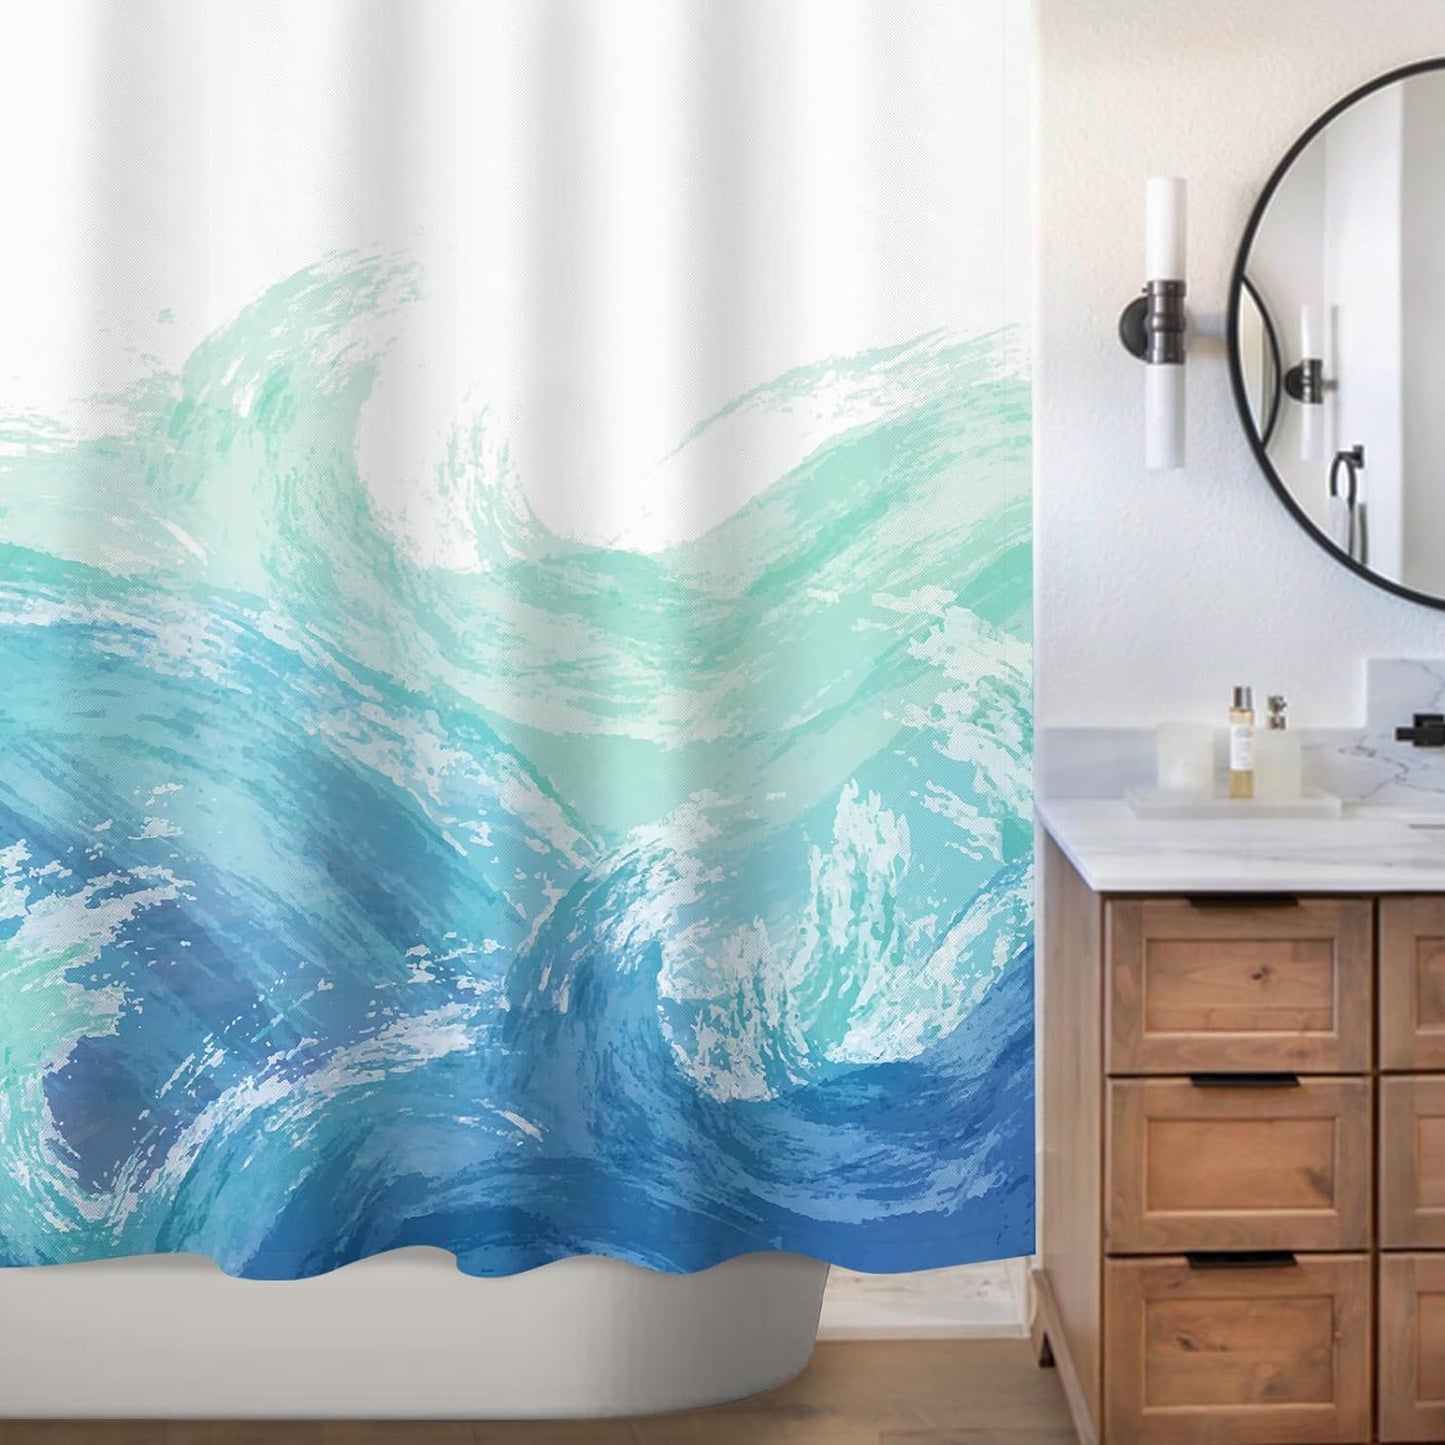 Wave Shower Curtain, Ombre Blue and Green Ocean Theme Shower Curtain for Bathroom Modern Decor Waterproof Tapestry, 71x71 Inch